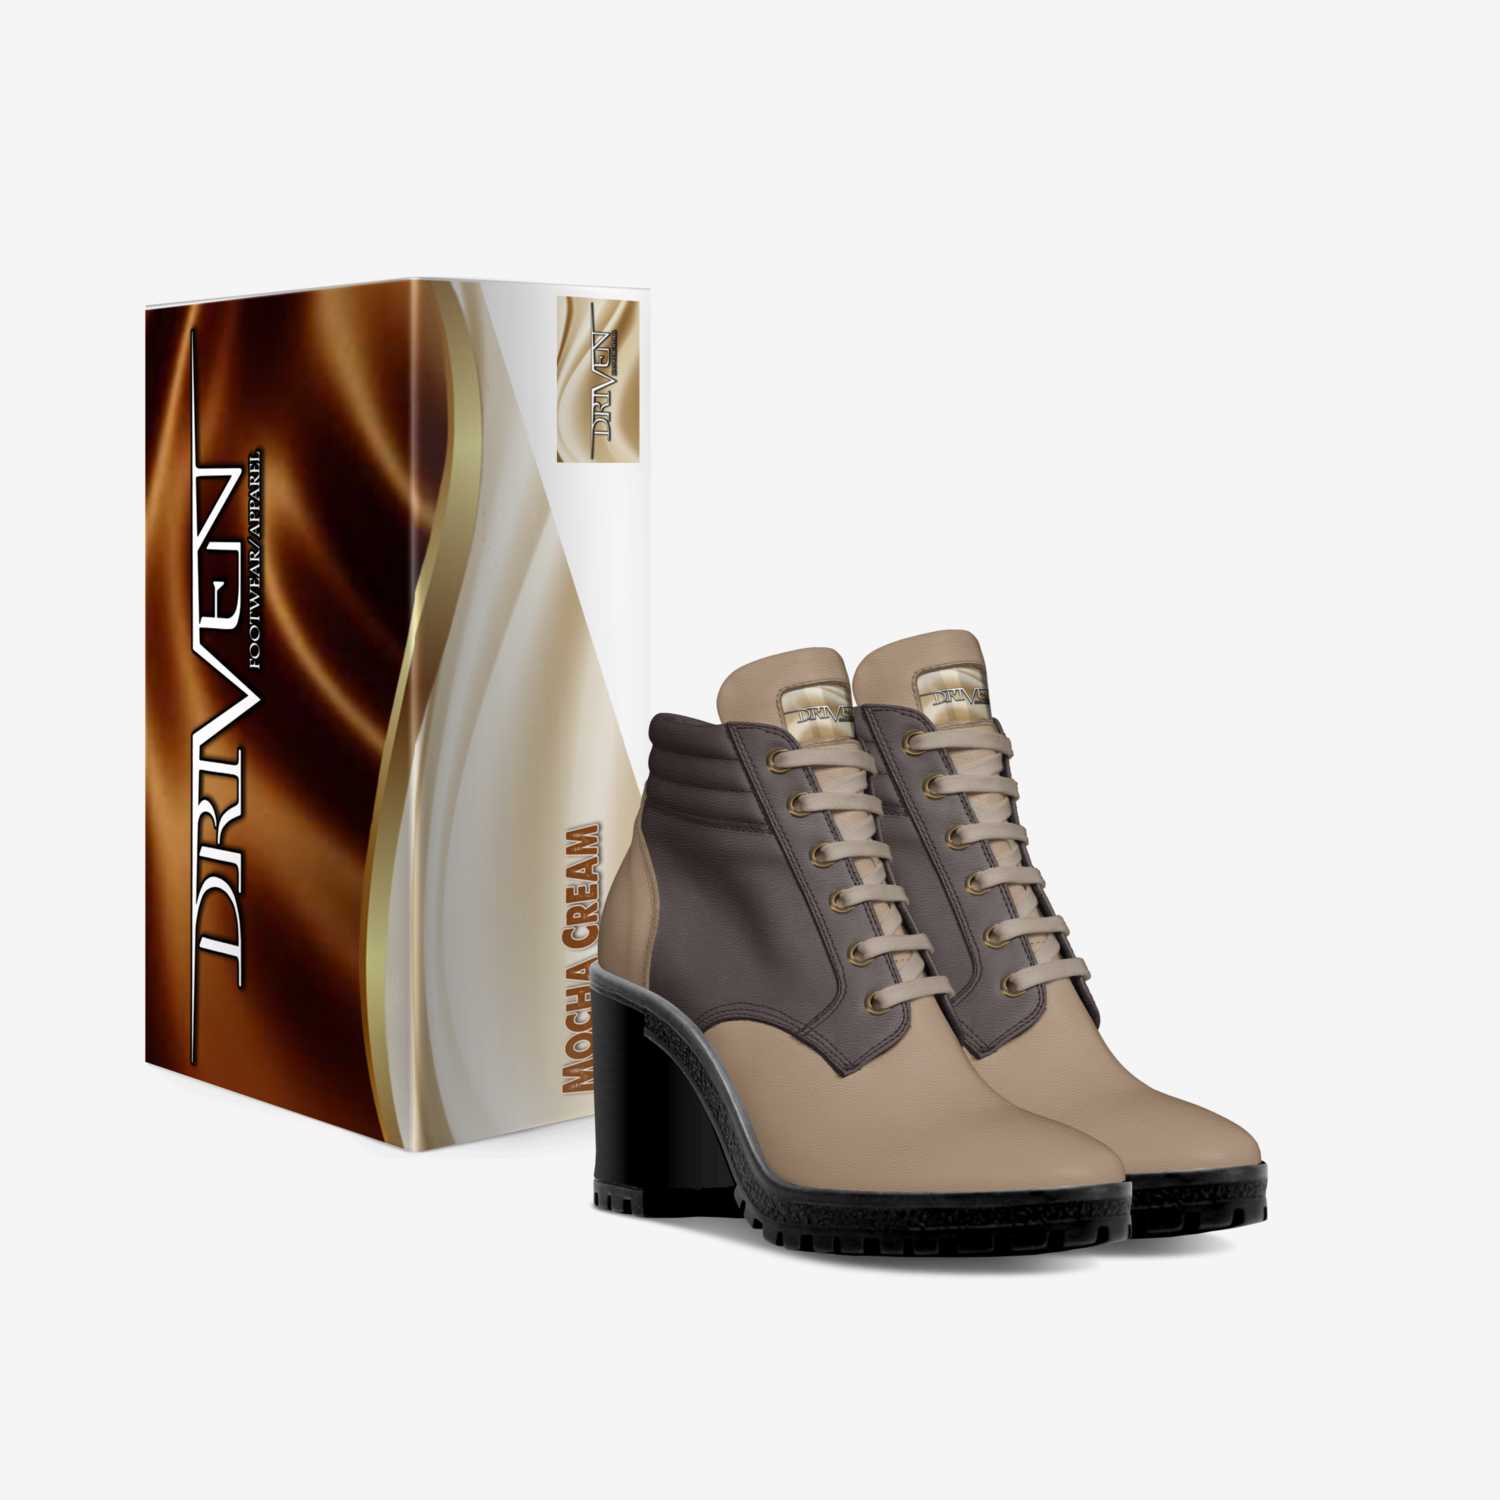 driven mocha cream custom made in Italy shoes by Jason Oberly | Box view